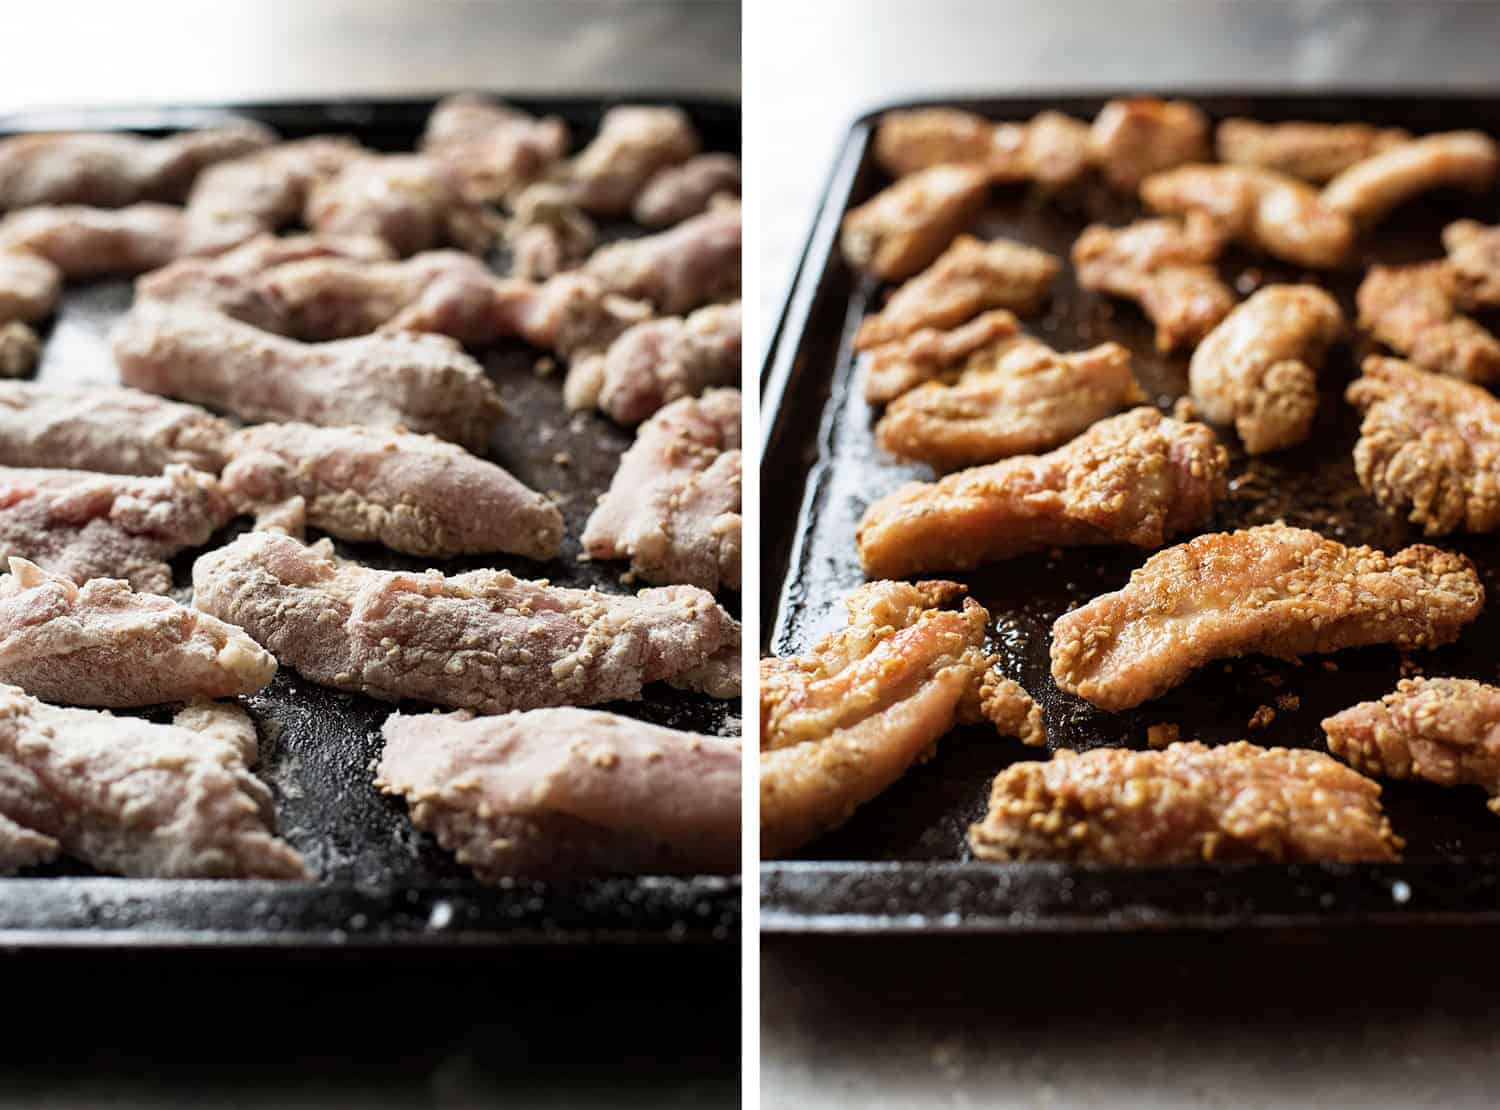 Dusted Chinese Honey Sesame Chicken before and after baking